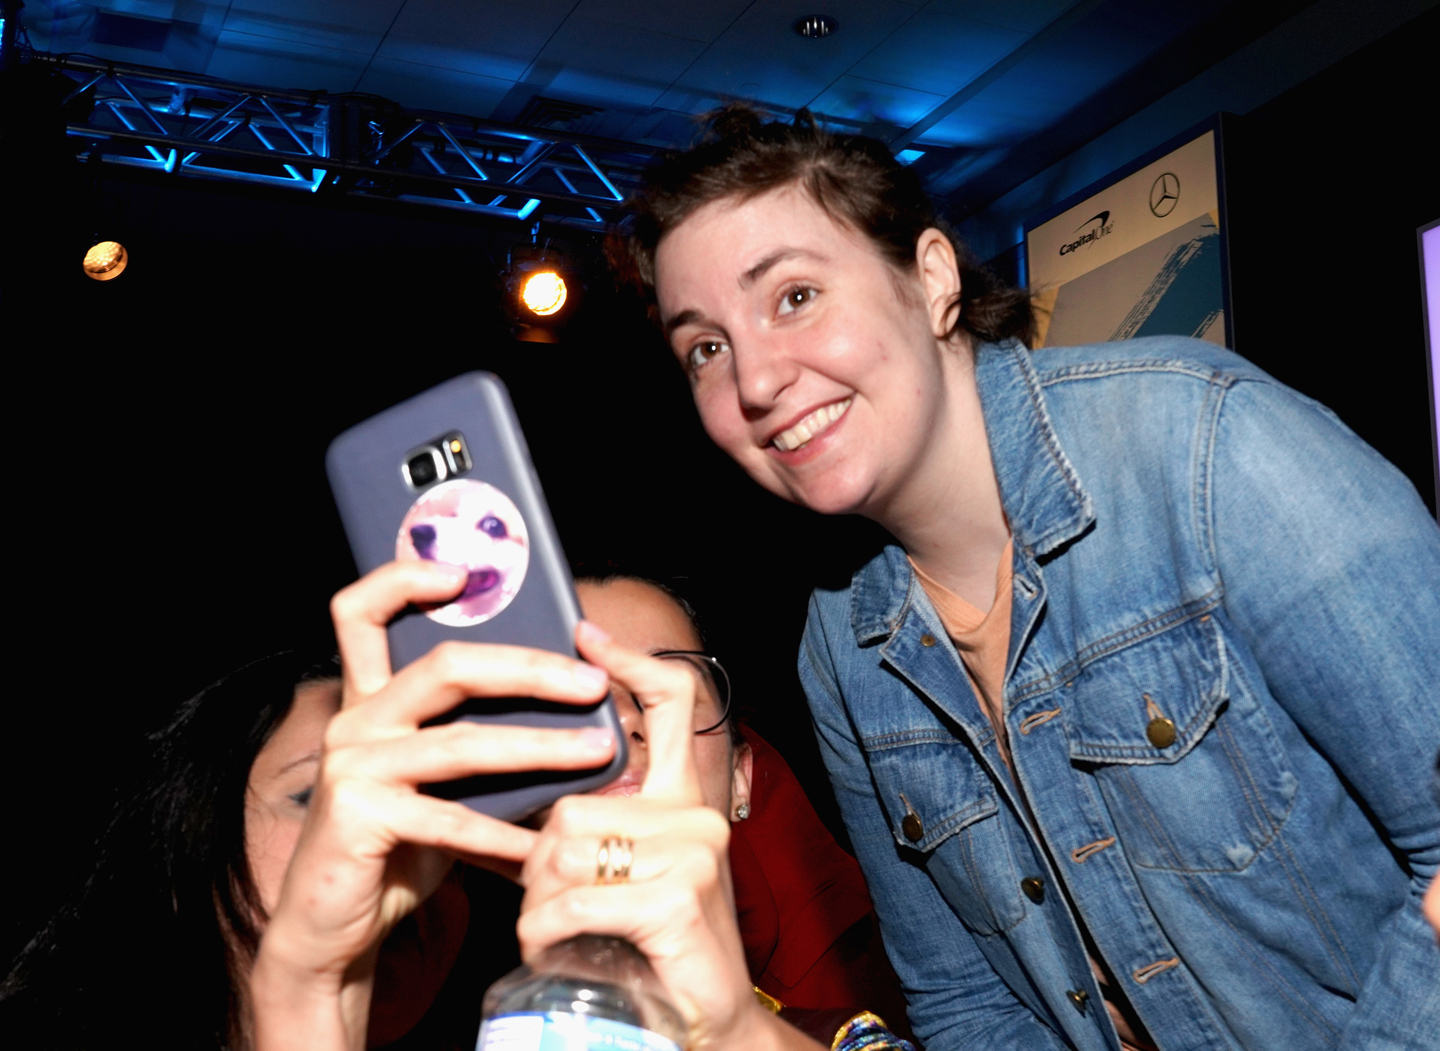 Lena Dunham takes a selfie with a fan at the “Authenticity and Media in 2018” session. Photo by Amy E. Price/Getty Images